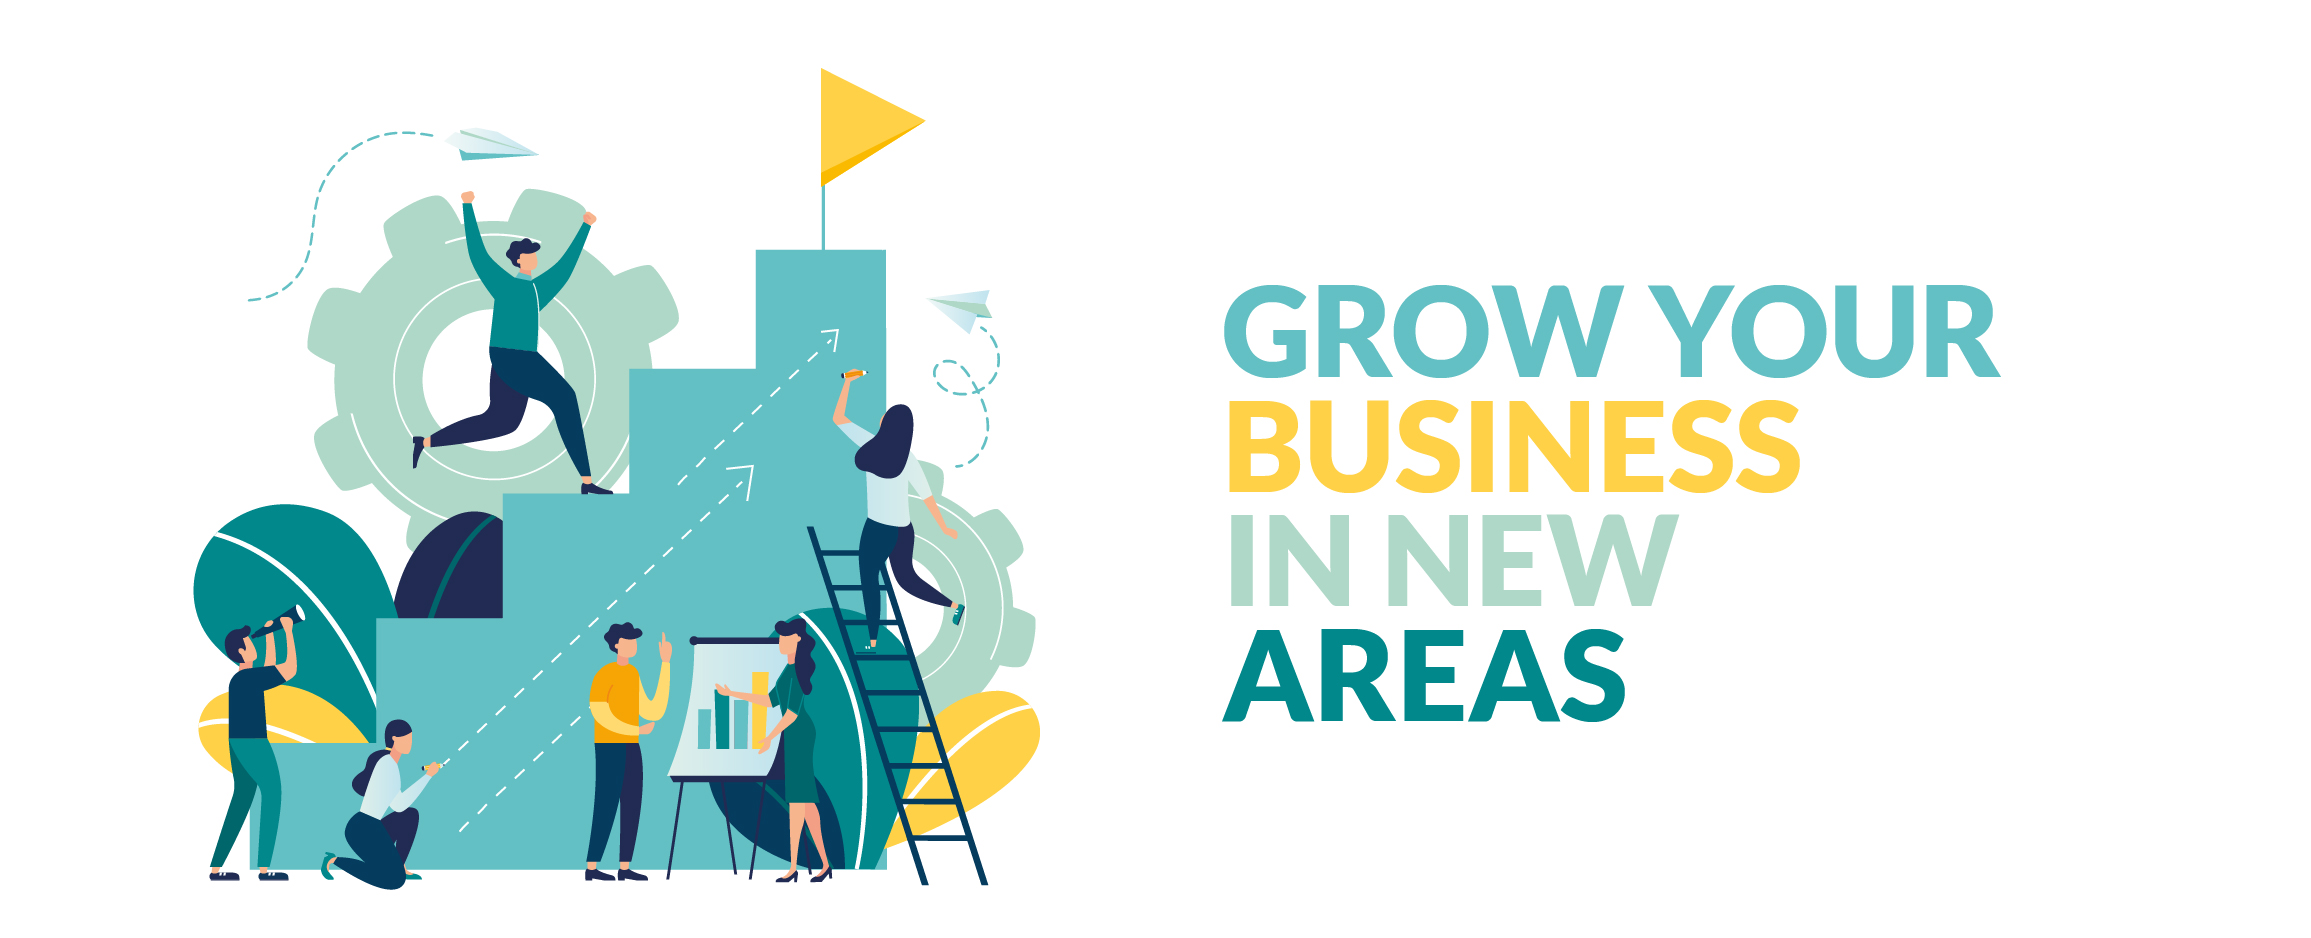 Grow your Business in new areas